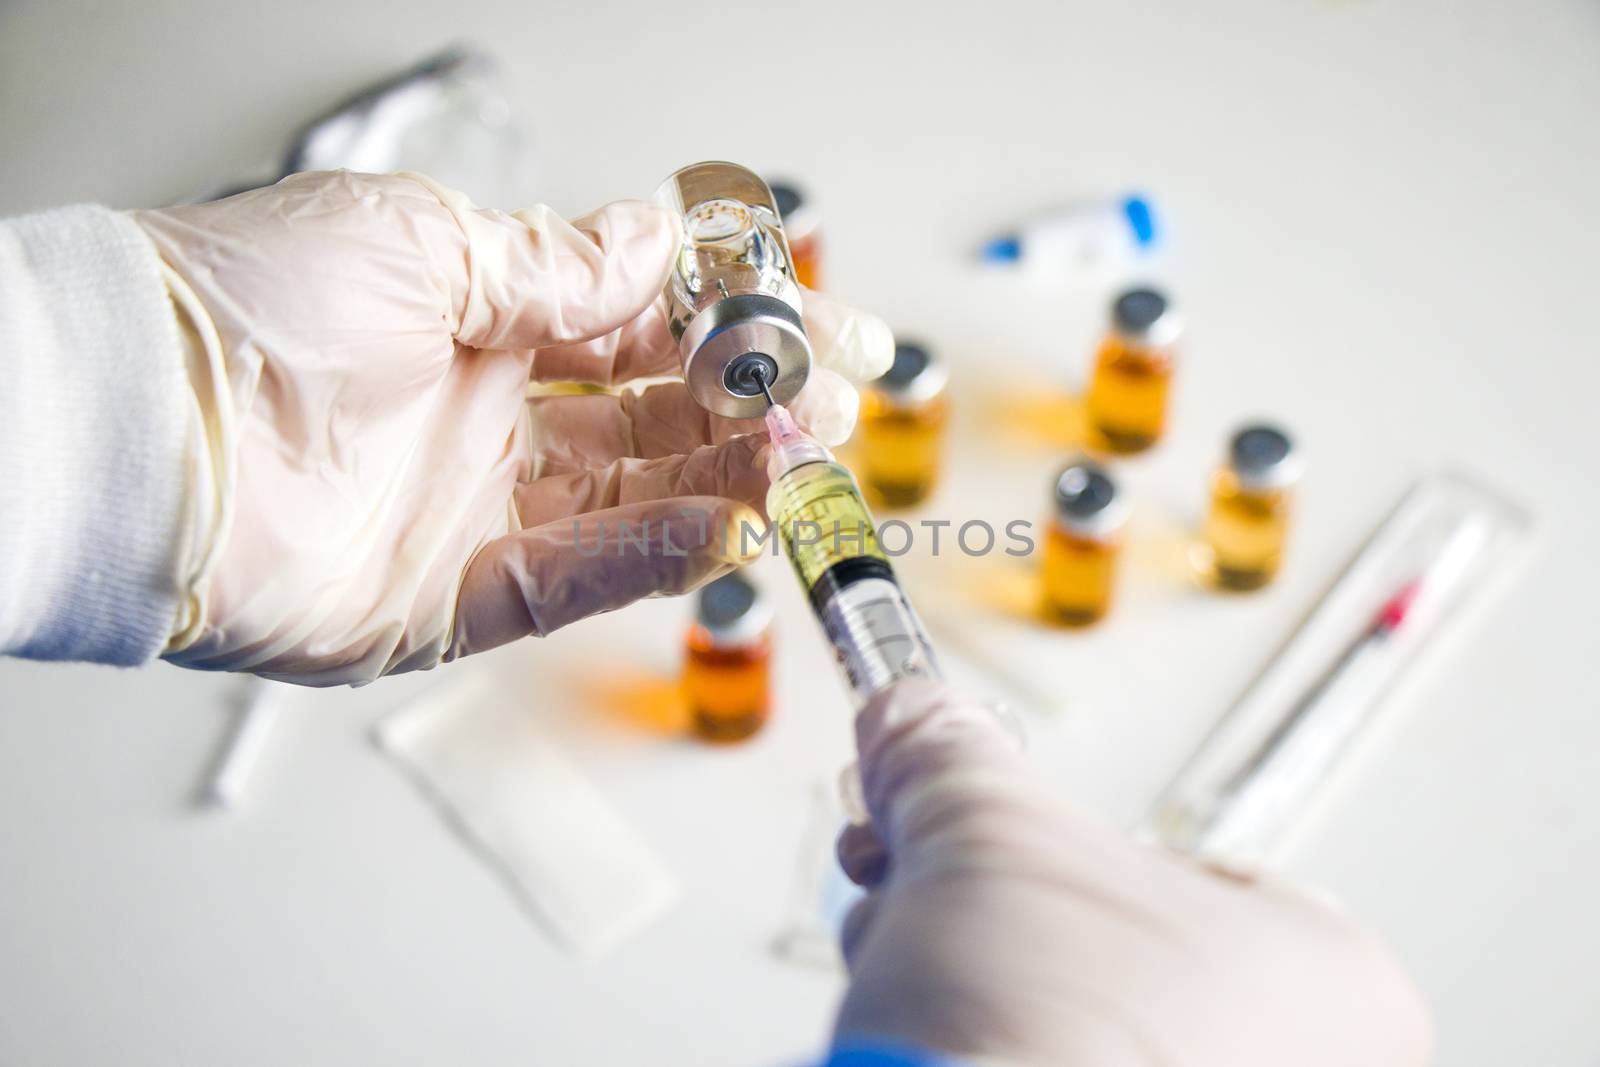 Corona virus and Covid - 19 new vaccine in ampules and bottles, needle and doctors hands in glove. by Taidundua